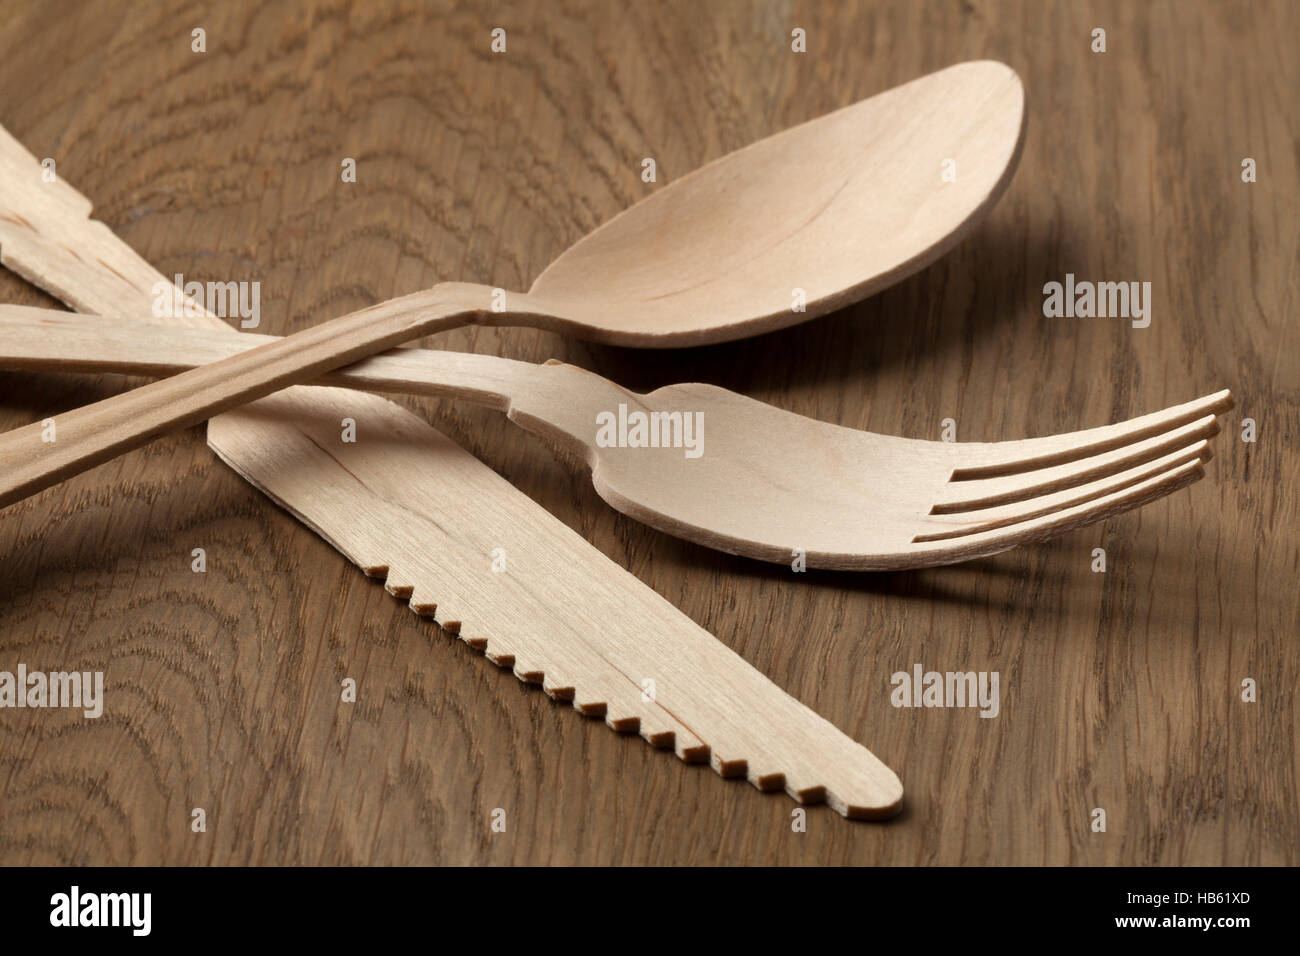 Disposable wooden fork, knife and spoon Stock Photo